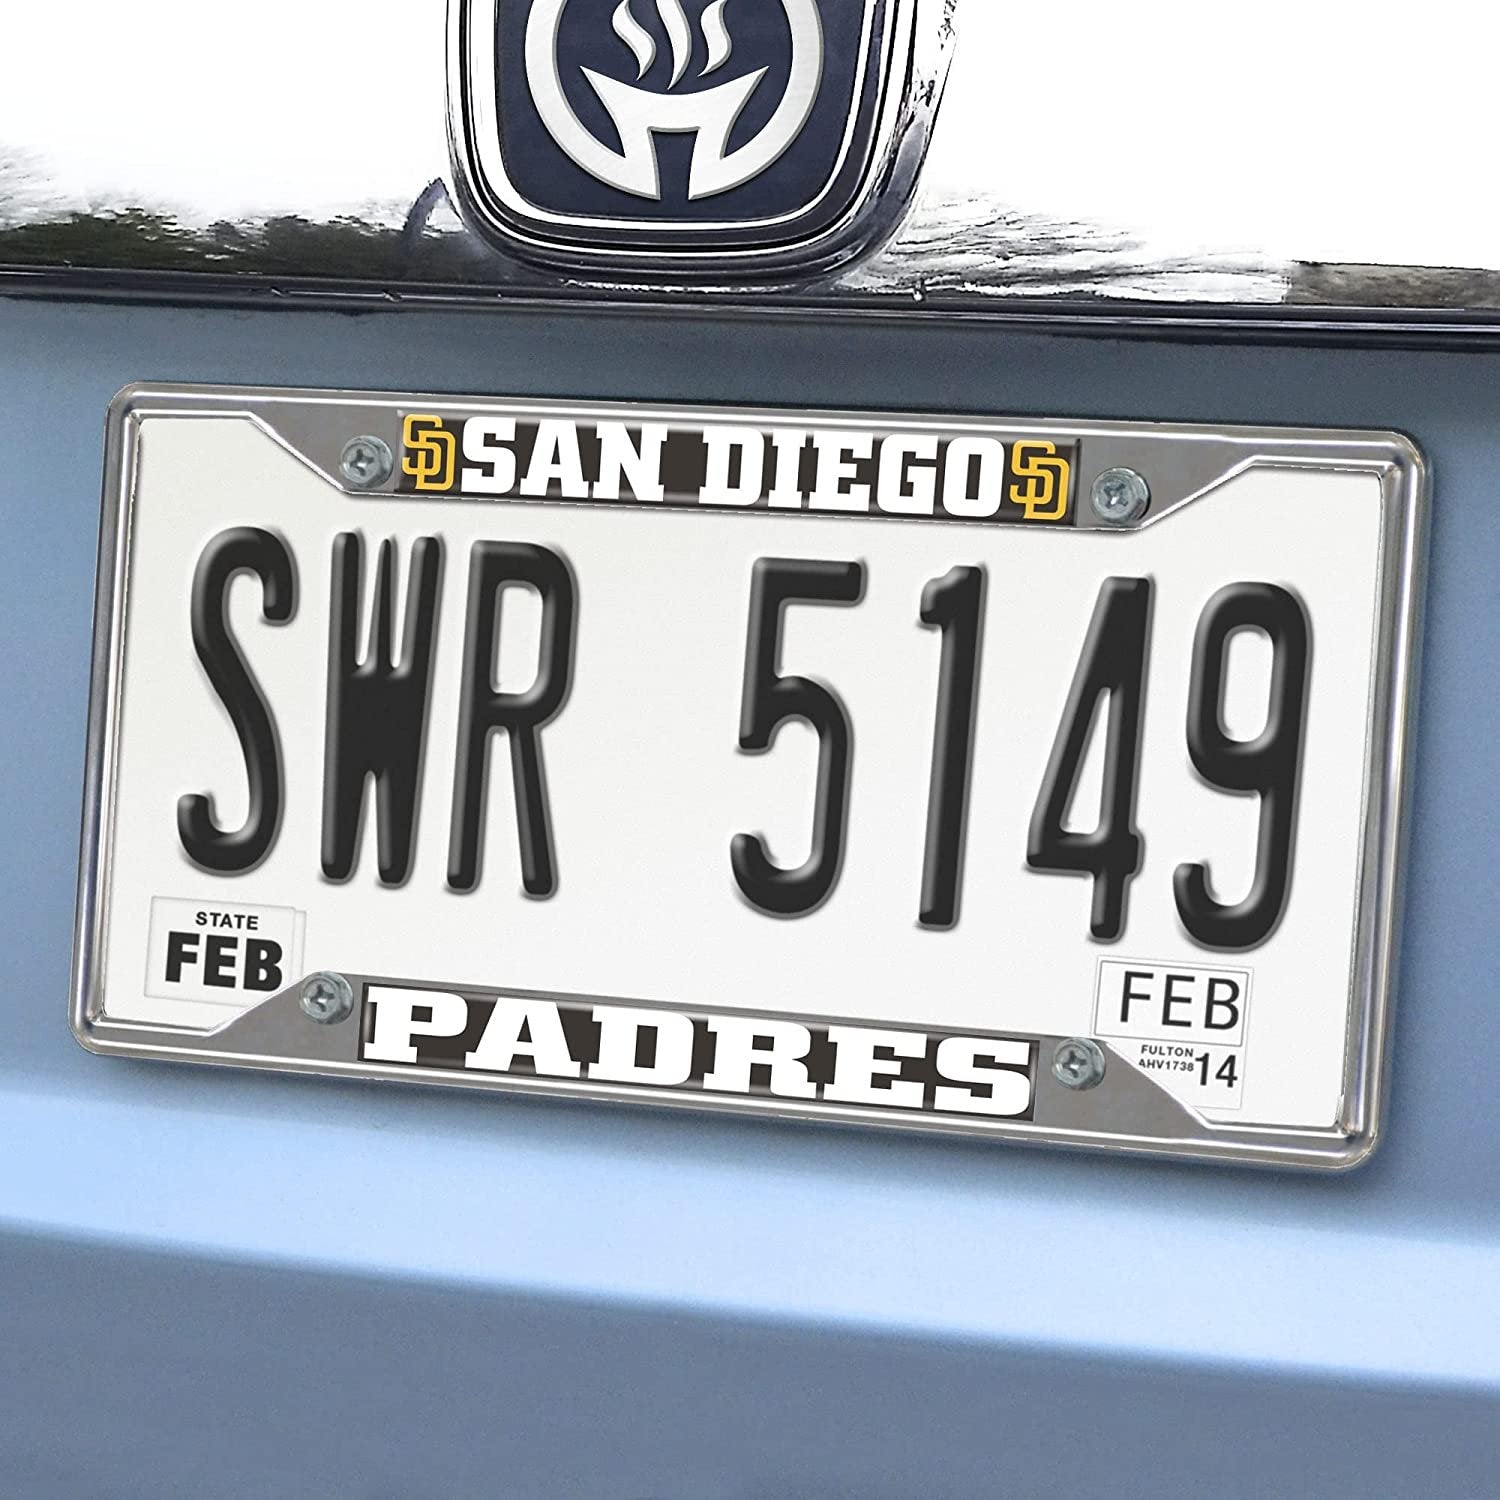 San Diego Padres Metal License Plate Frame Tag Cover Chrome 6x12 Inch